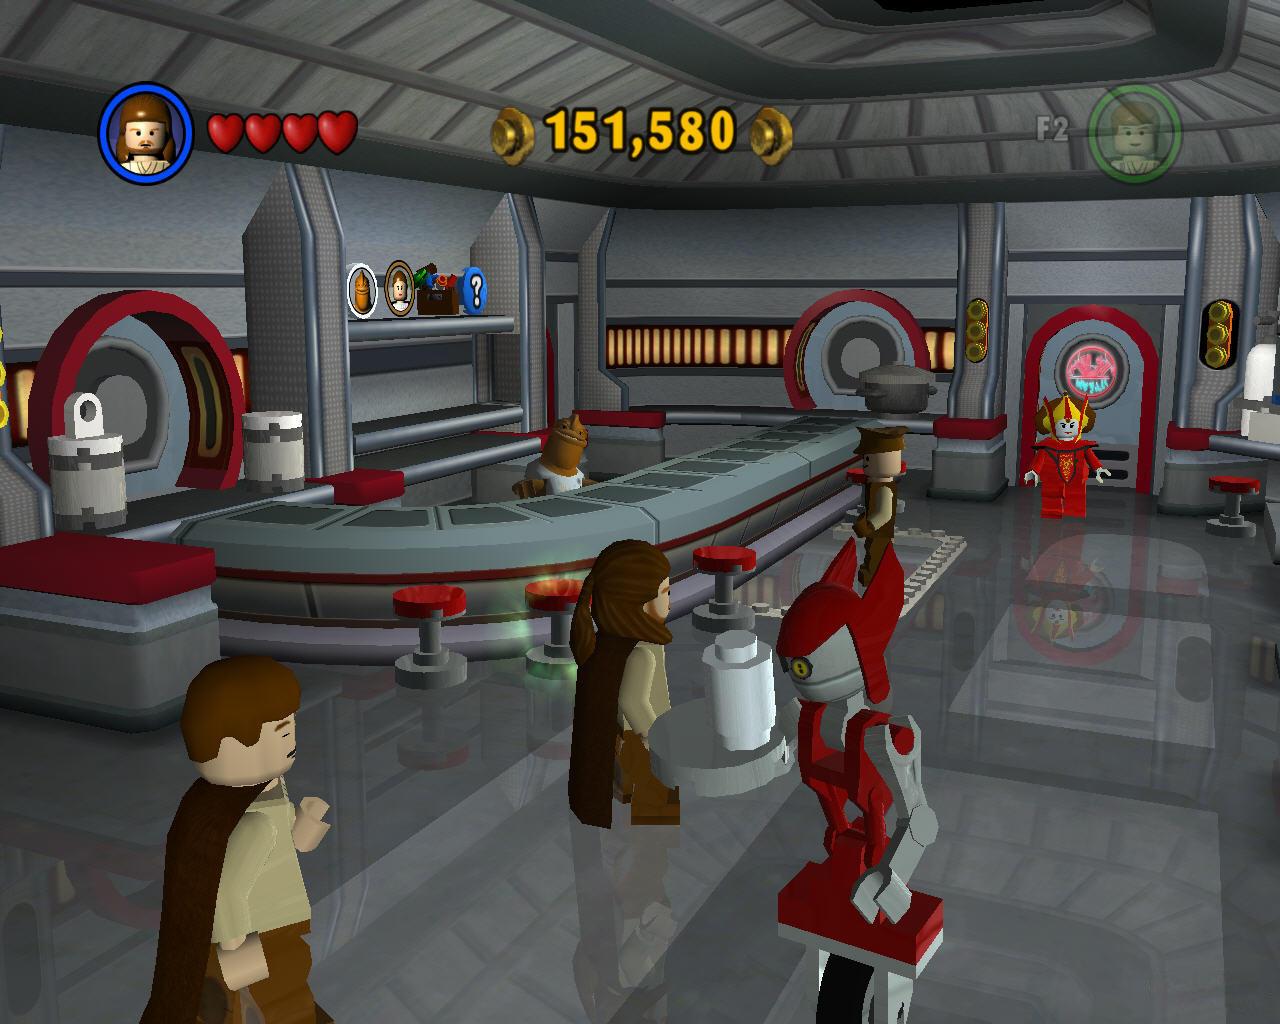 download lego star wars video game for free